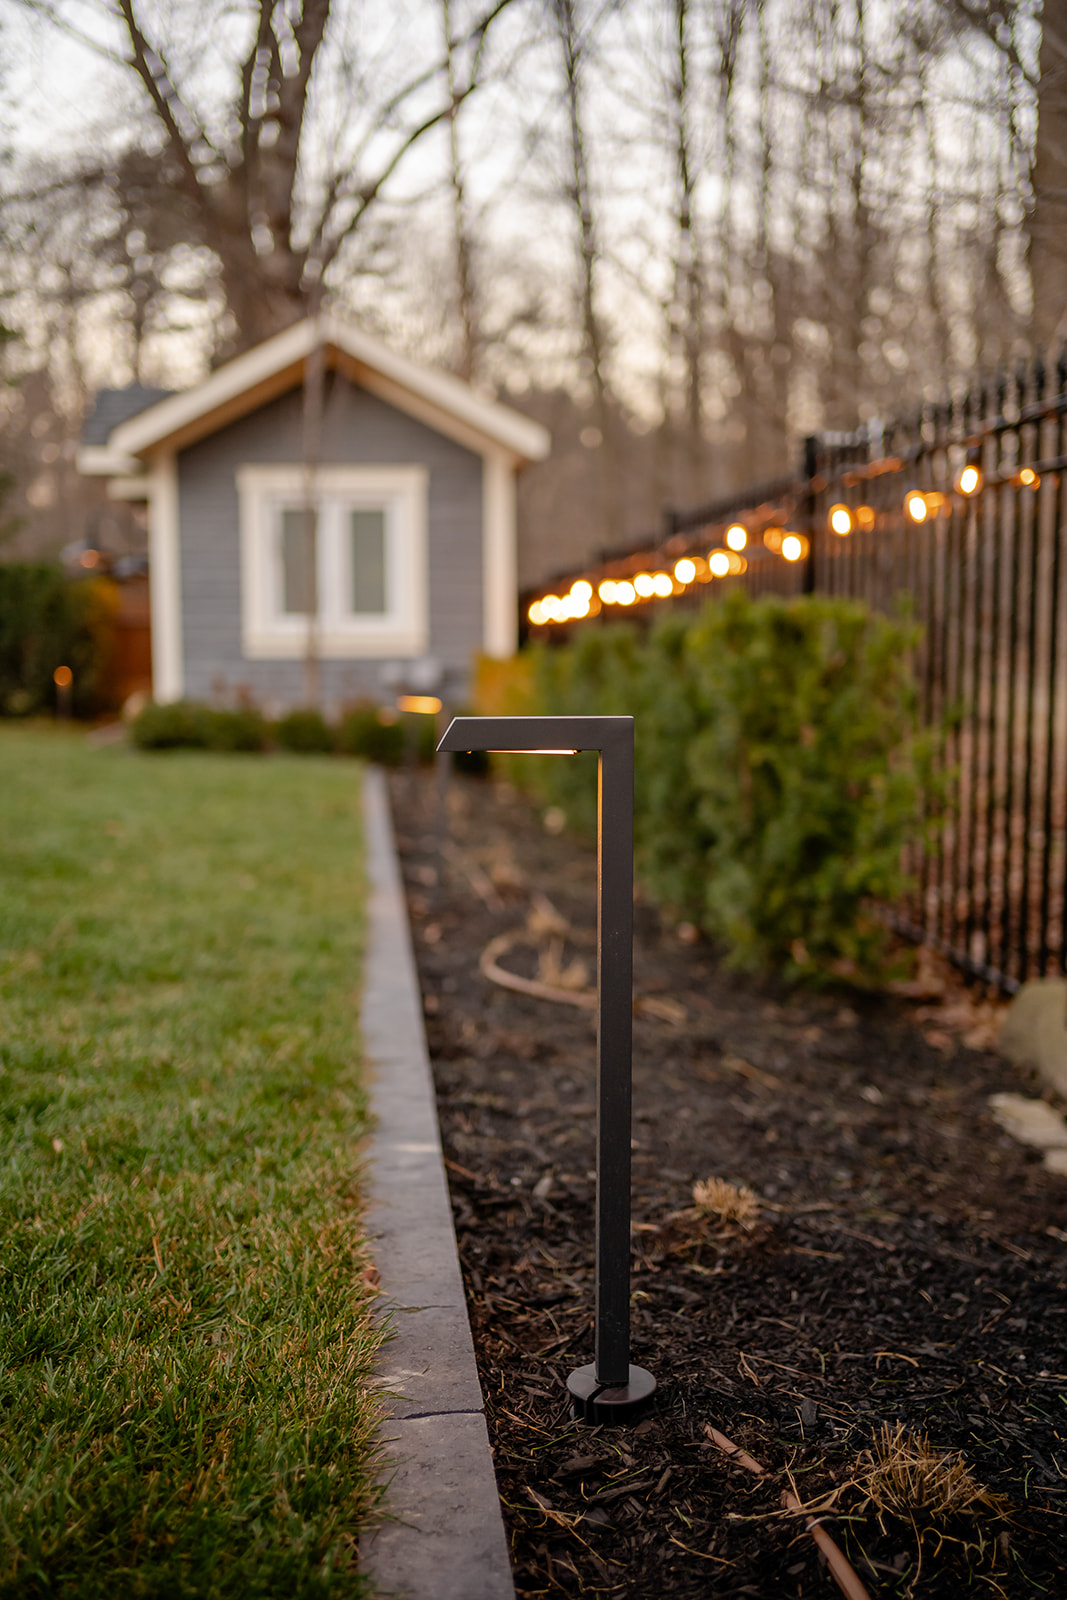 A small lamp planted in the garden with the pool house in the backyard.